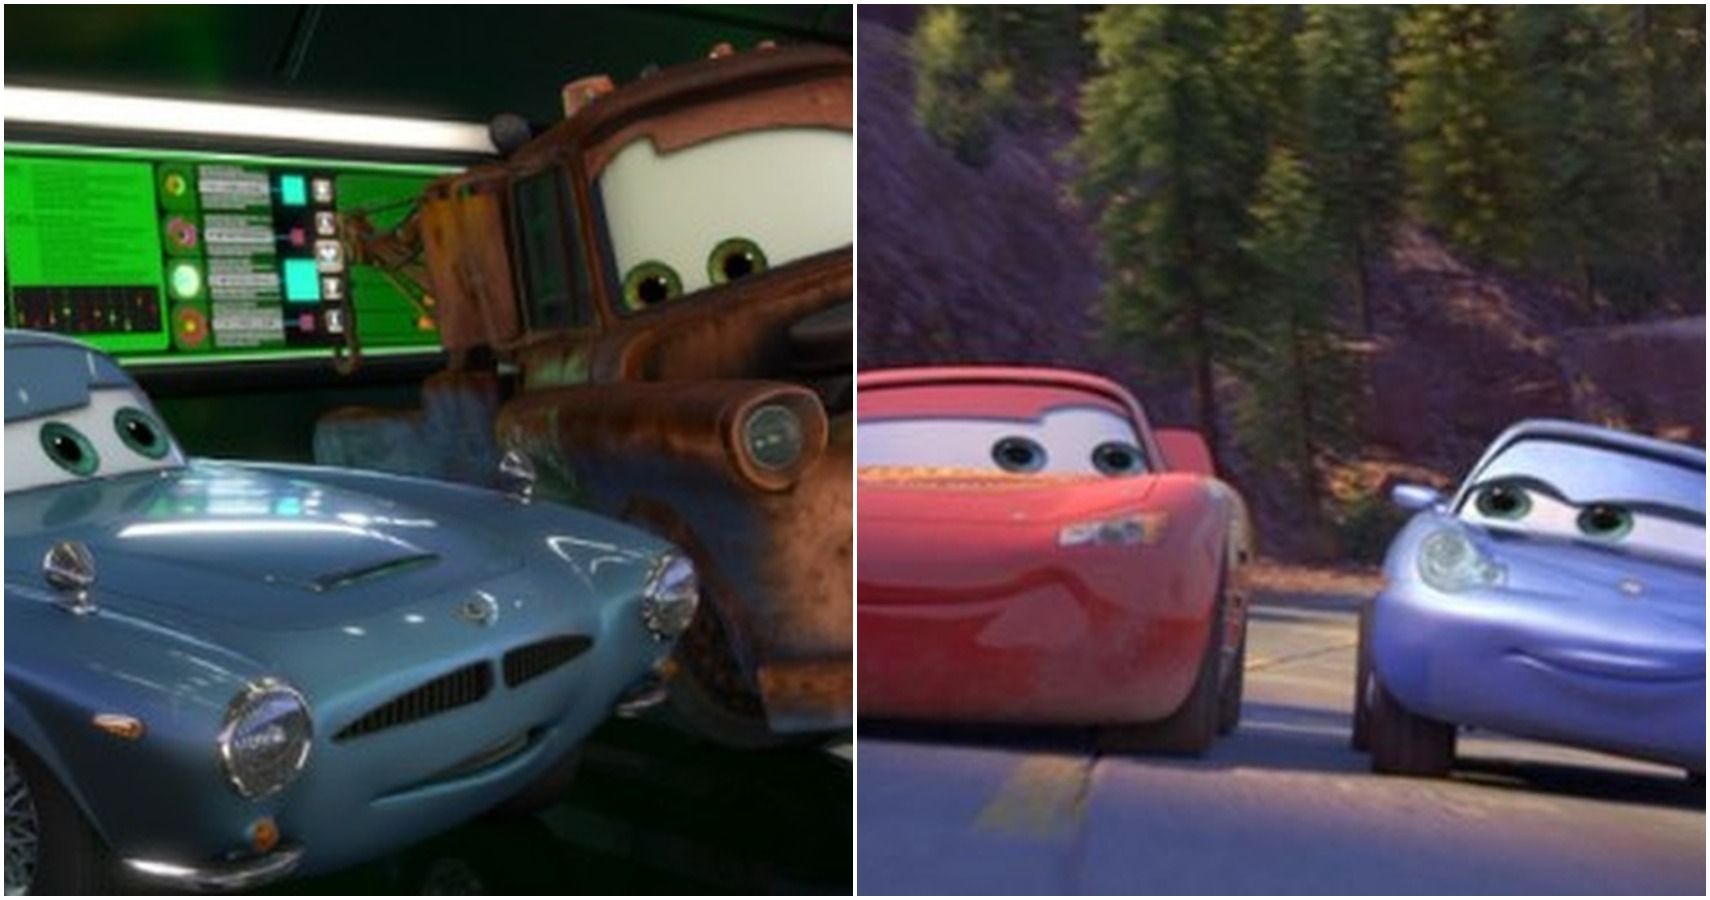 Finn and Mater on left, Sally and Lightning McQueen on right in Cars split image